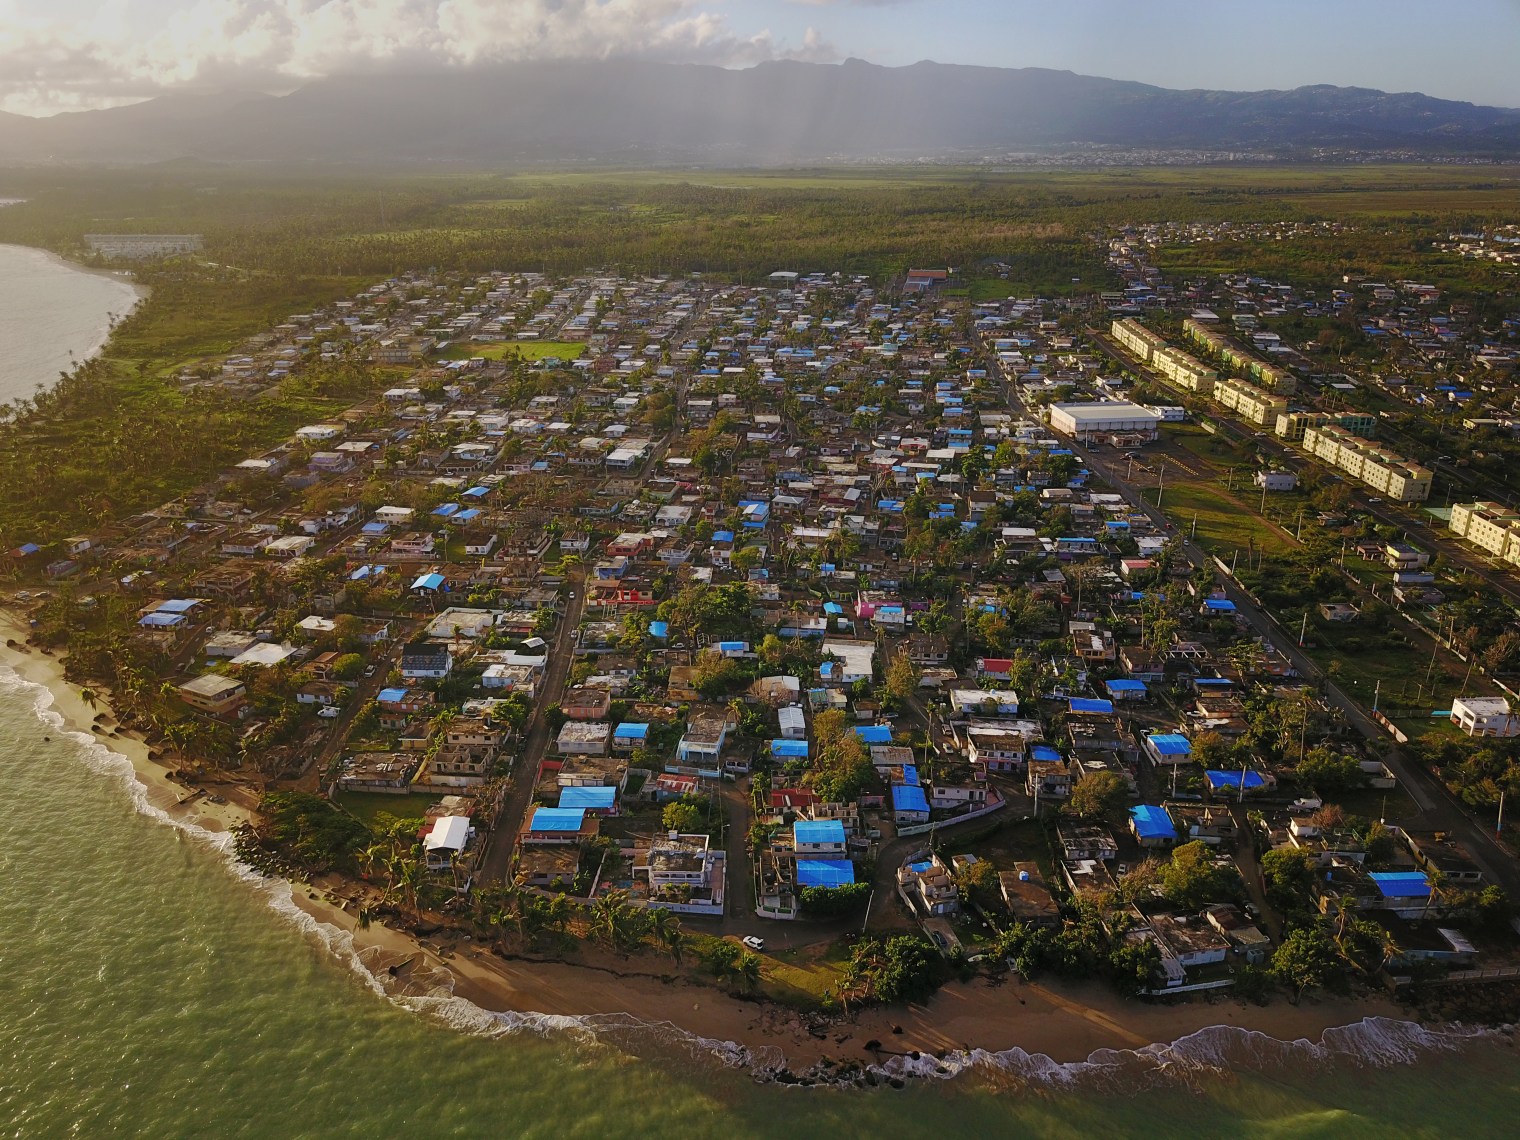 The coastal city of Loiza was hard hit by Hurricane Maria with a long-lasting power outage and water and food shortages. 